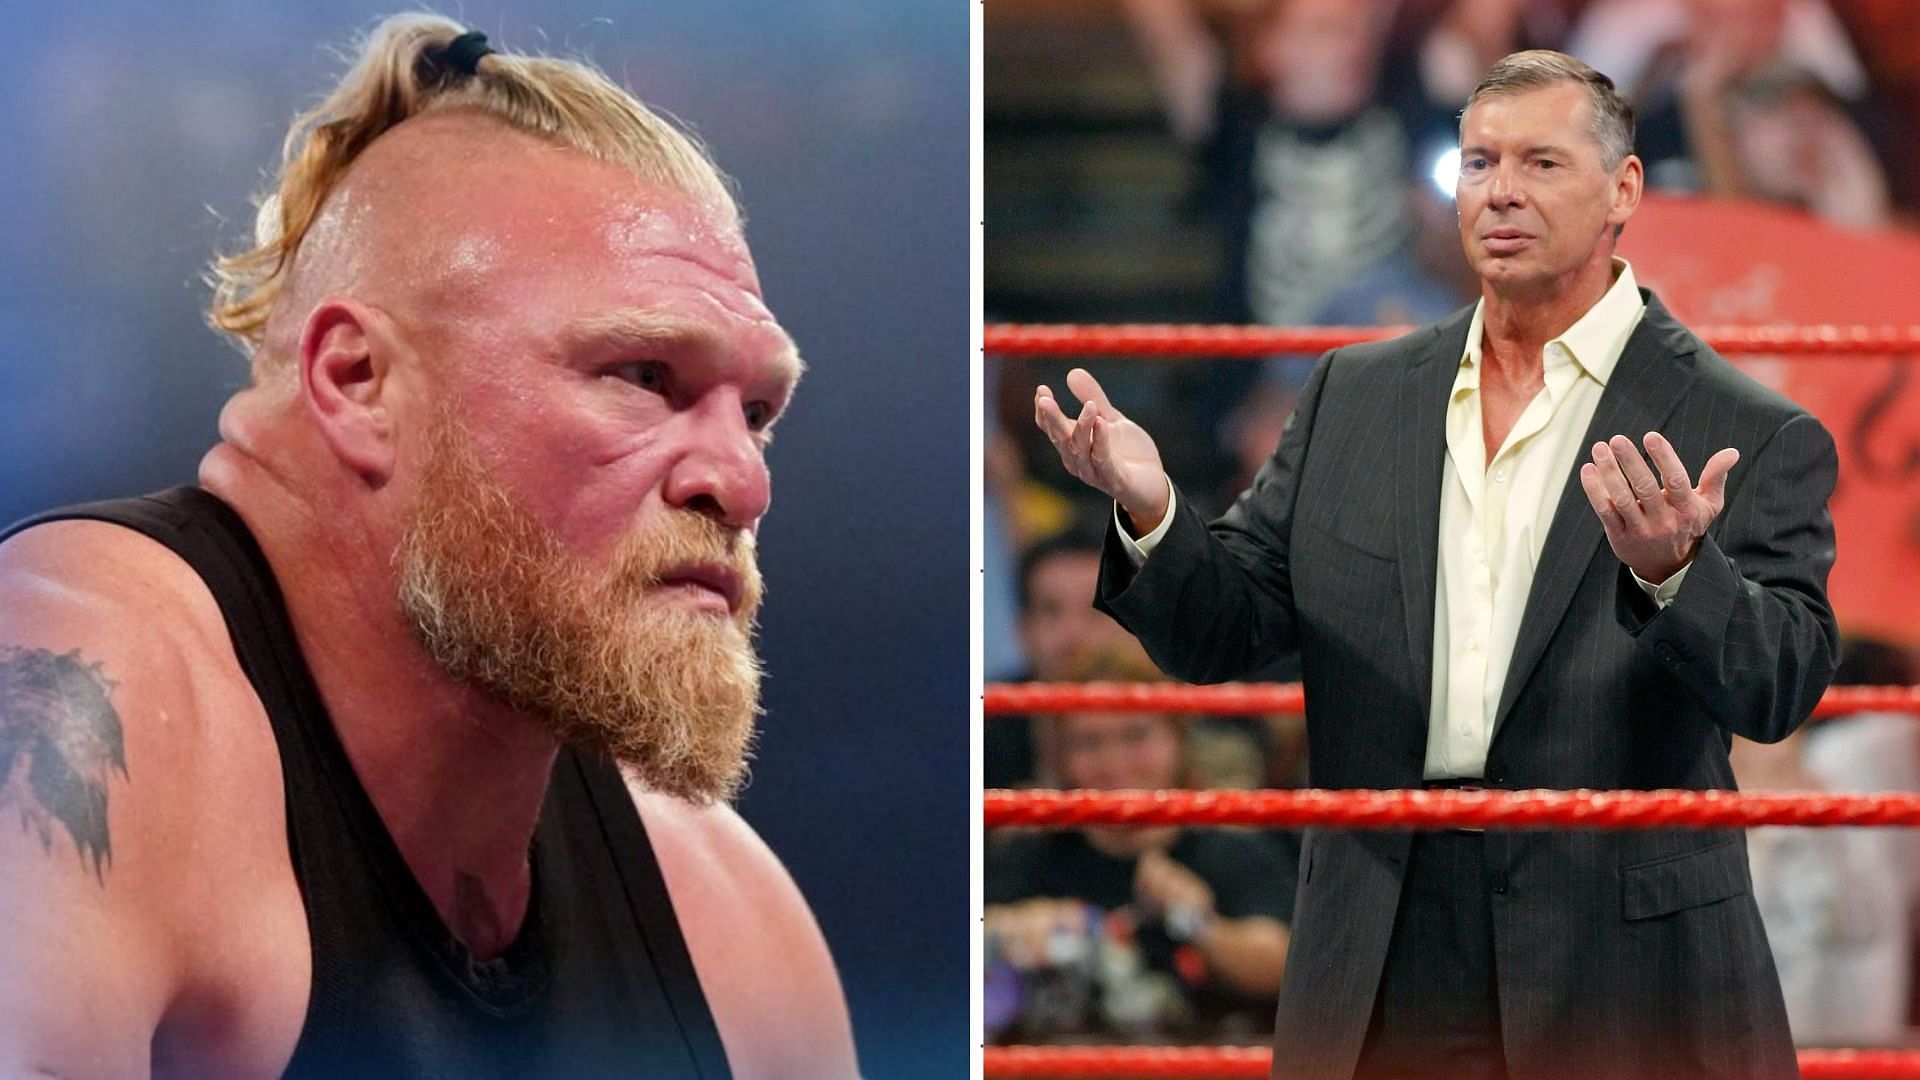 Brock Lesnar was not pleased with Vince McMahon no longer leading WWE